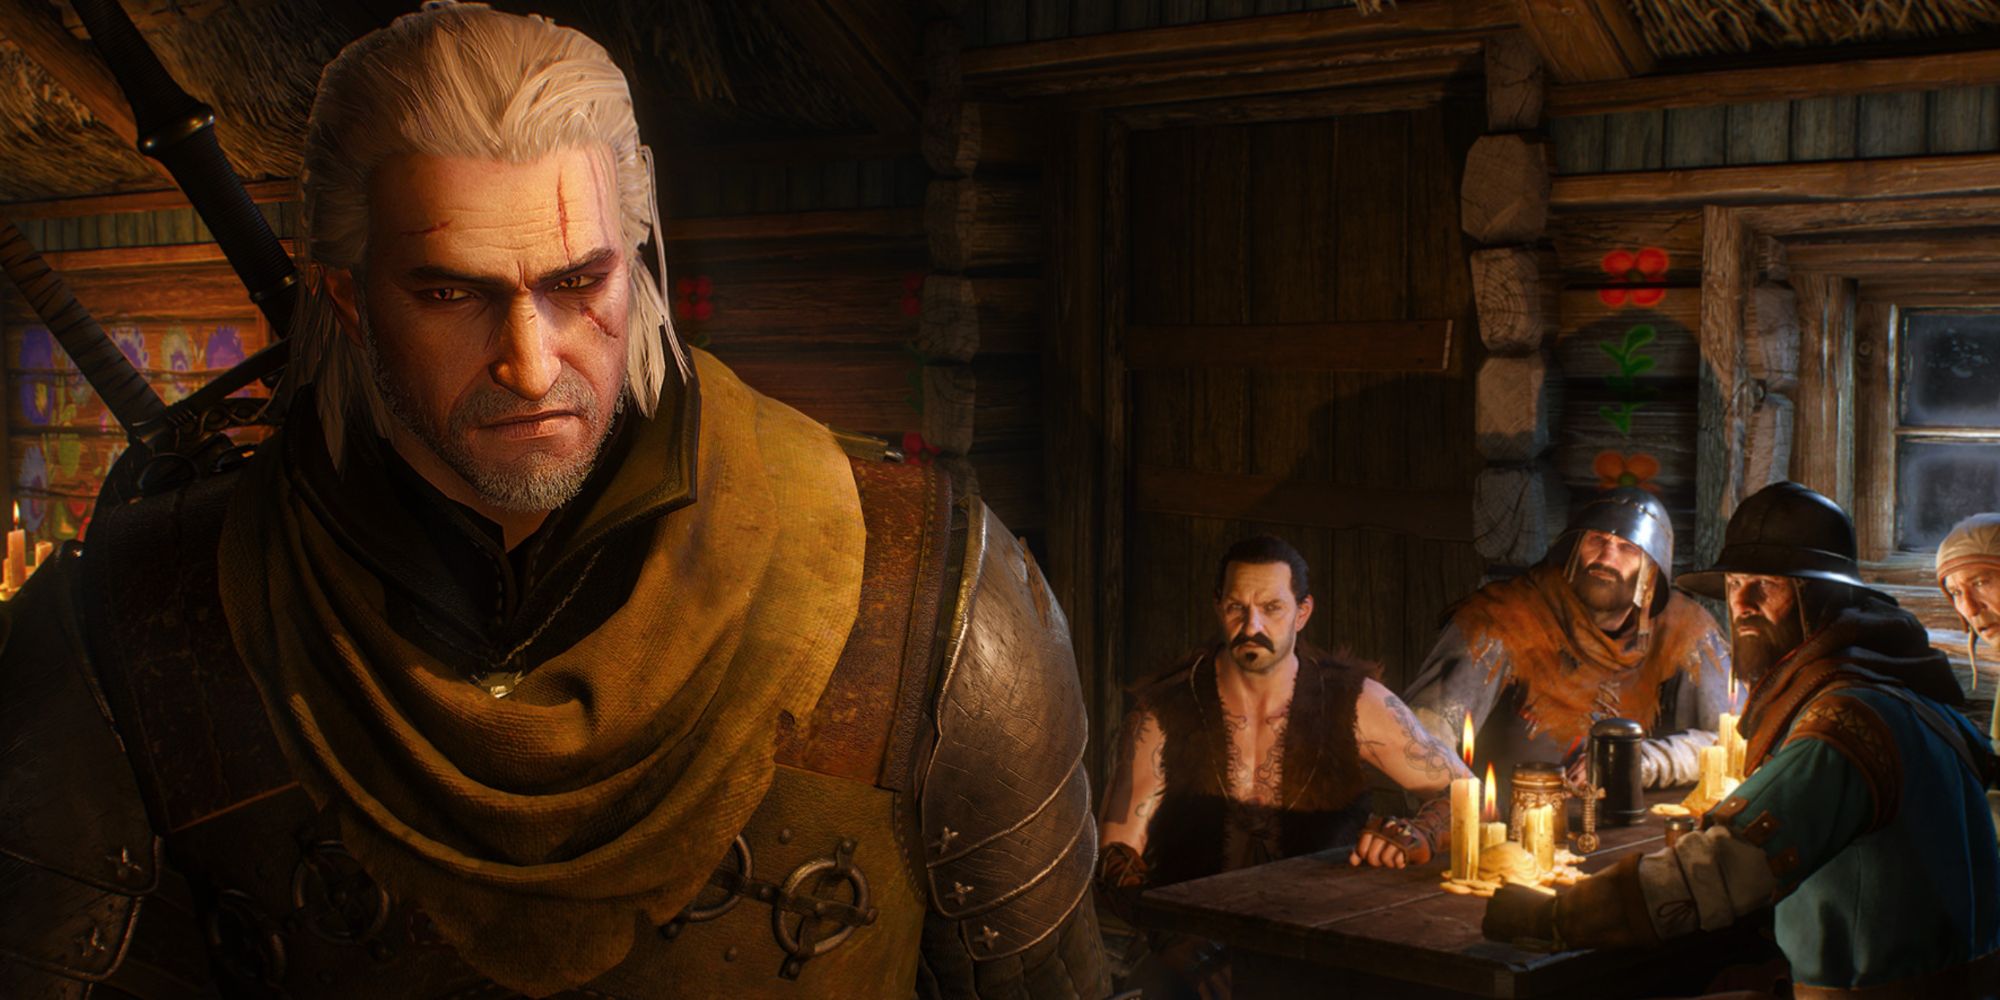 Geralt facing the camera and walking away from a group of thugs in a tavern in The Witcher 3: Wild Hunt